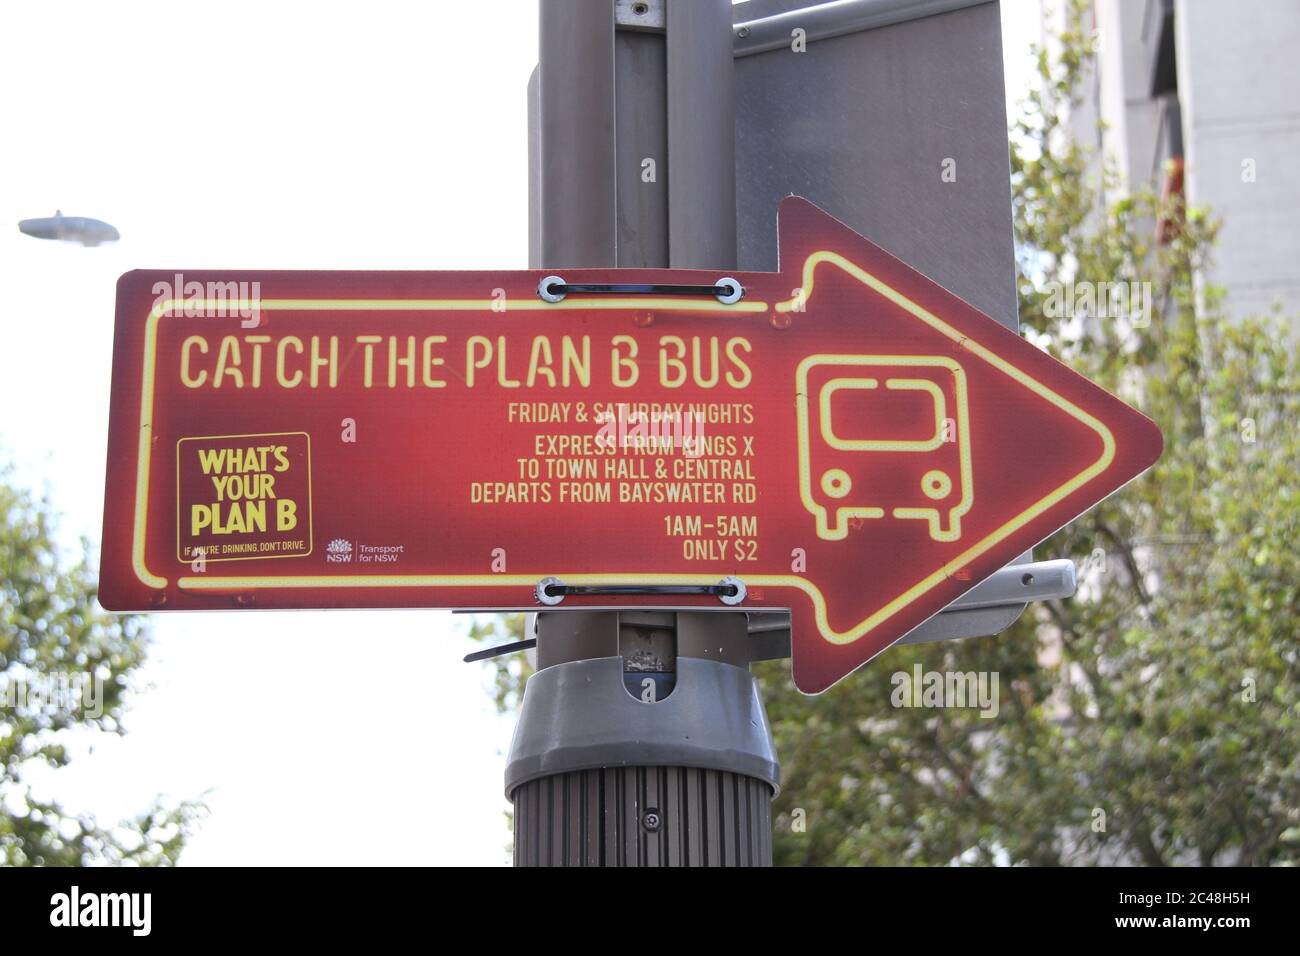 The Plan B bus is an initiative to transfer people form the Kings Cross entertainment district to the main transport hubs of Town Hall And Central tra Stock Photo